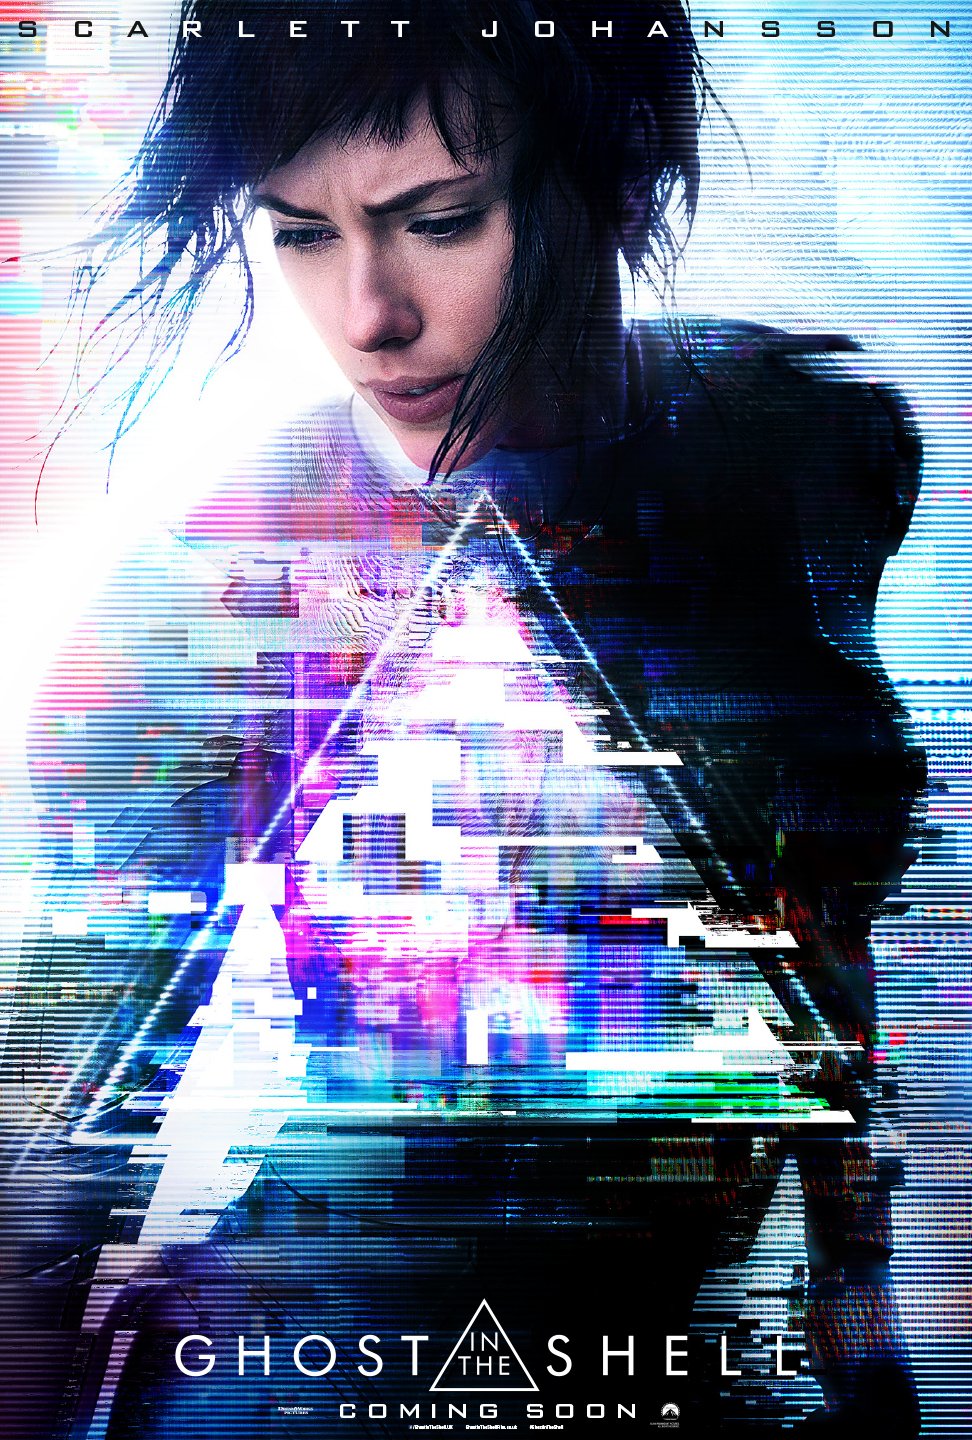 Ghost In The Shell film review: does the anime translate into live-action?